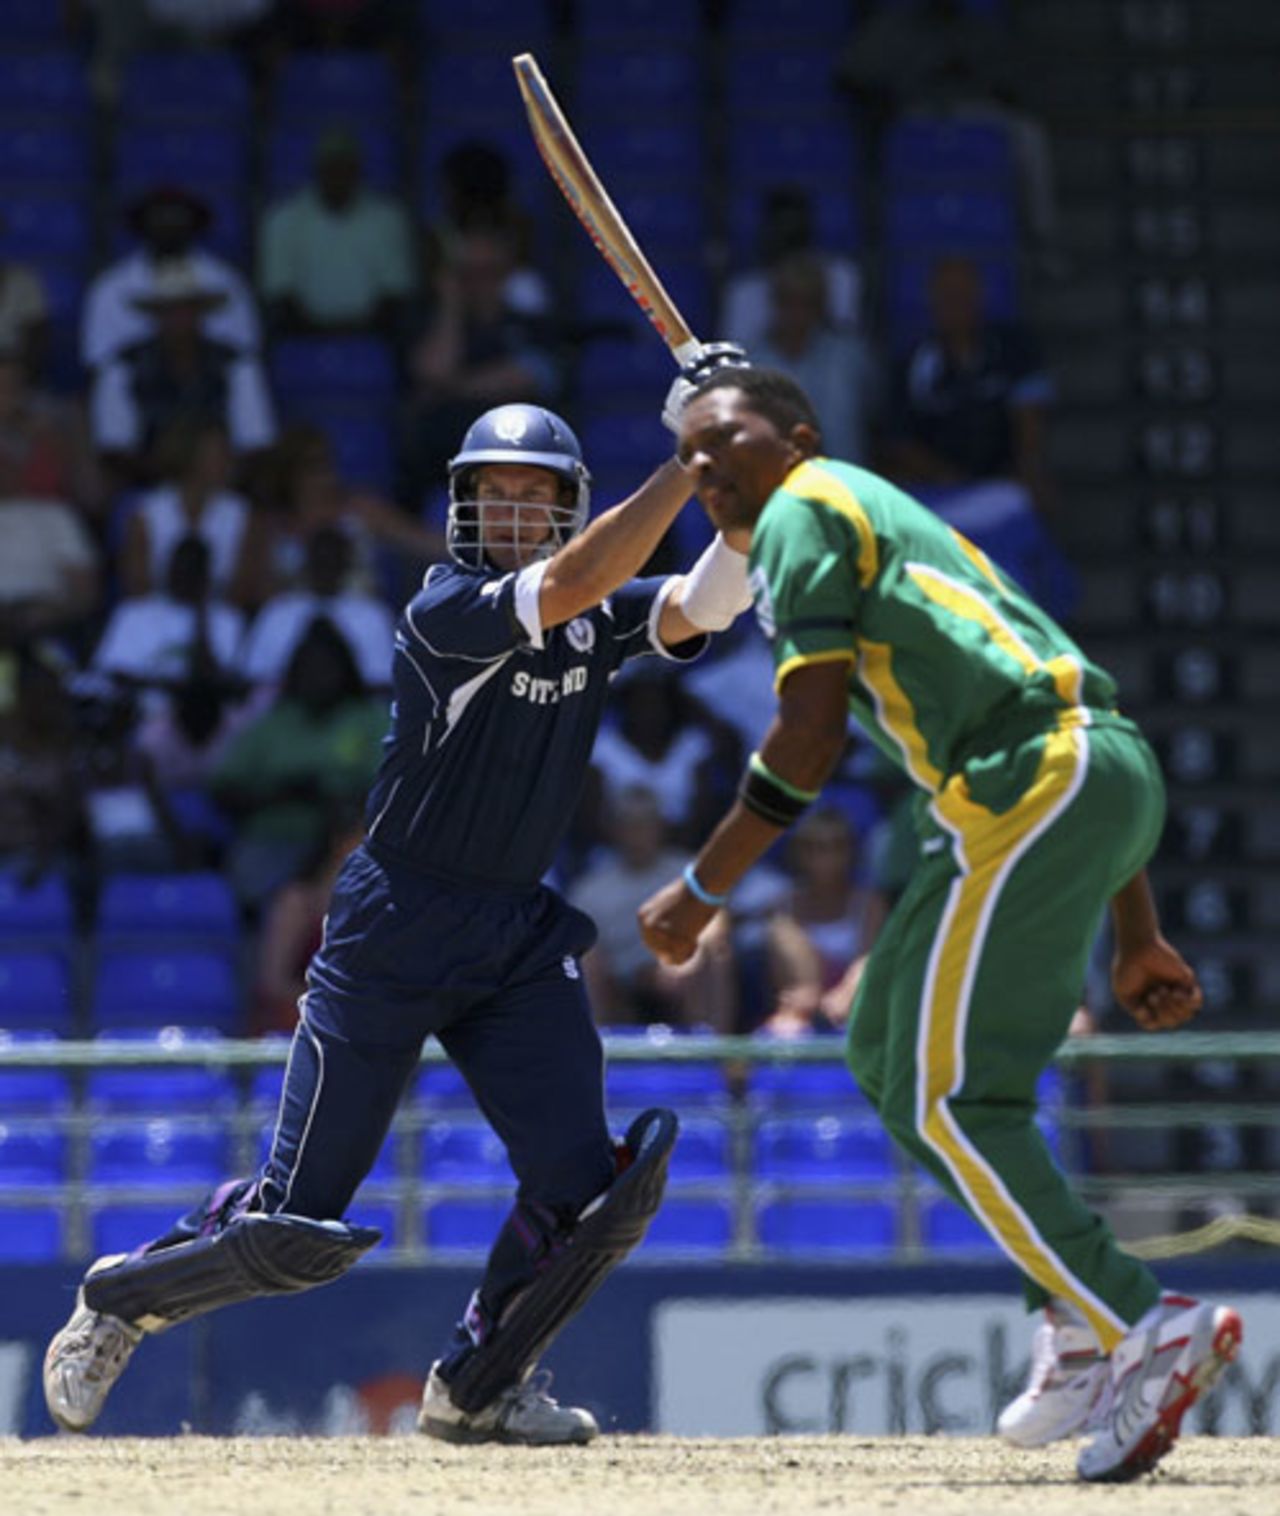 Colin Smith smacks Makhaya Ntini through the off side with confidence, Scotland v South Africa, Group A, St Kitts, March 20, 2007